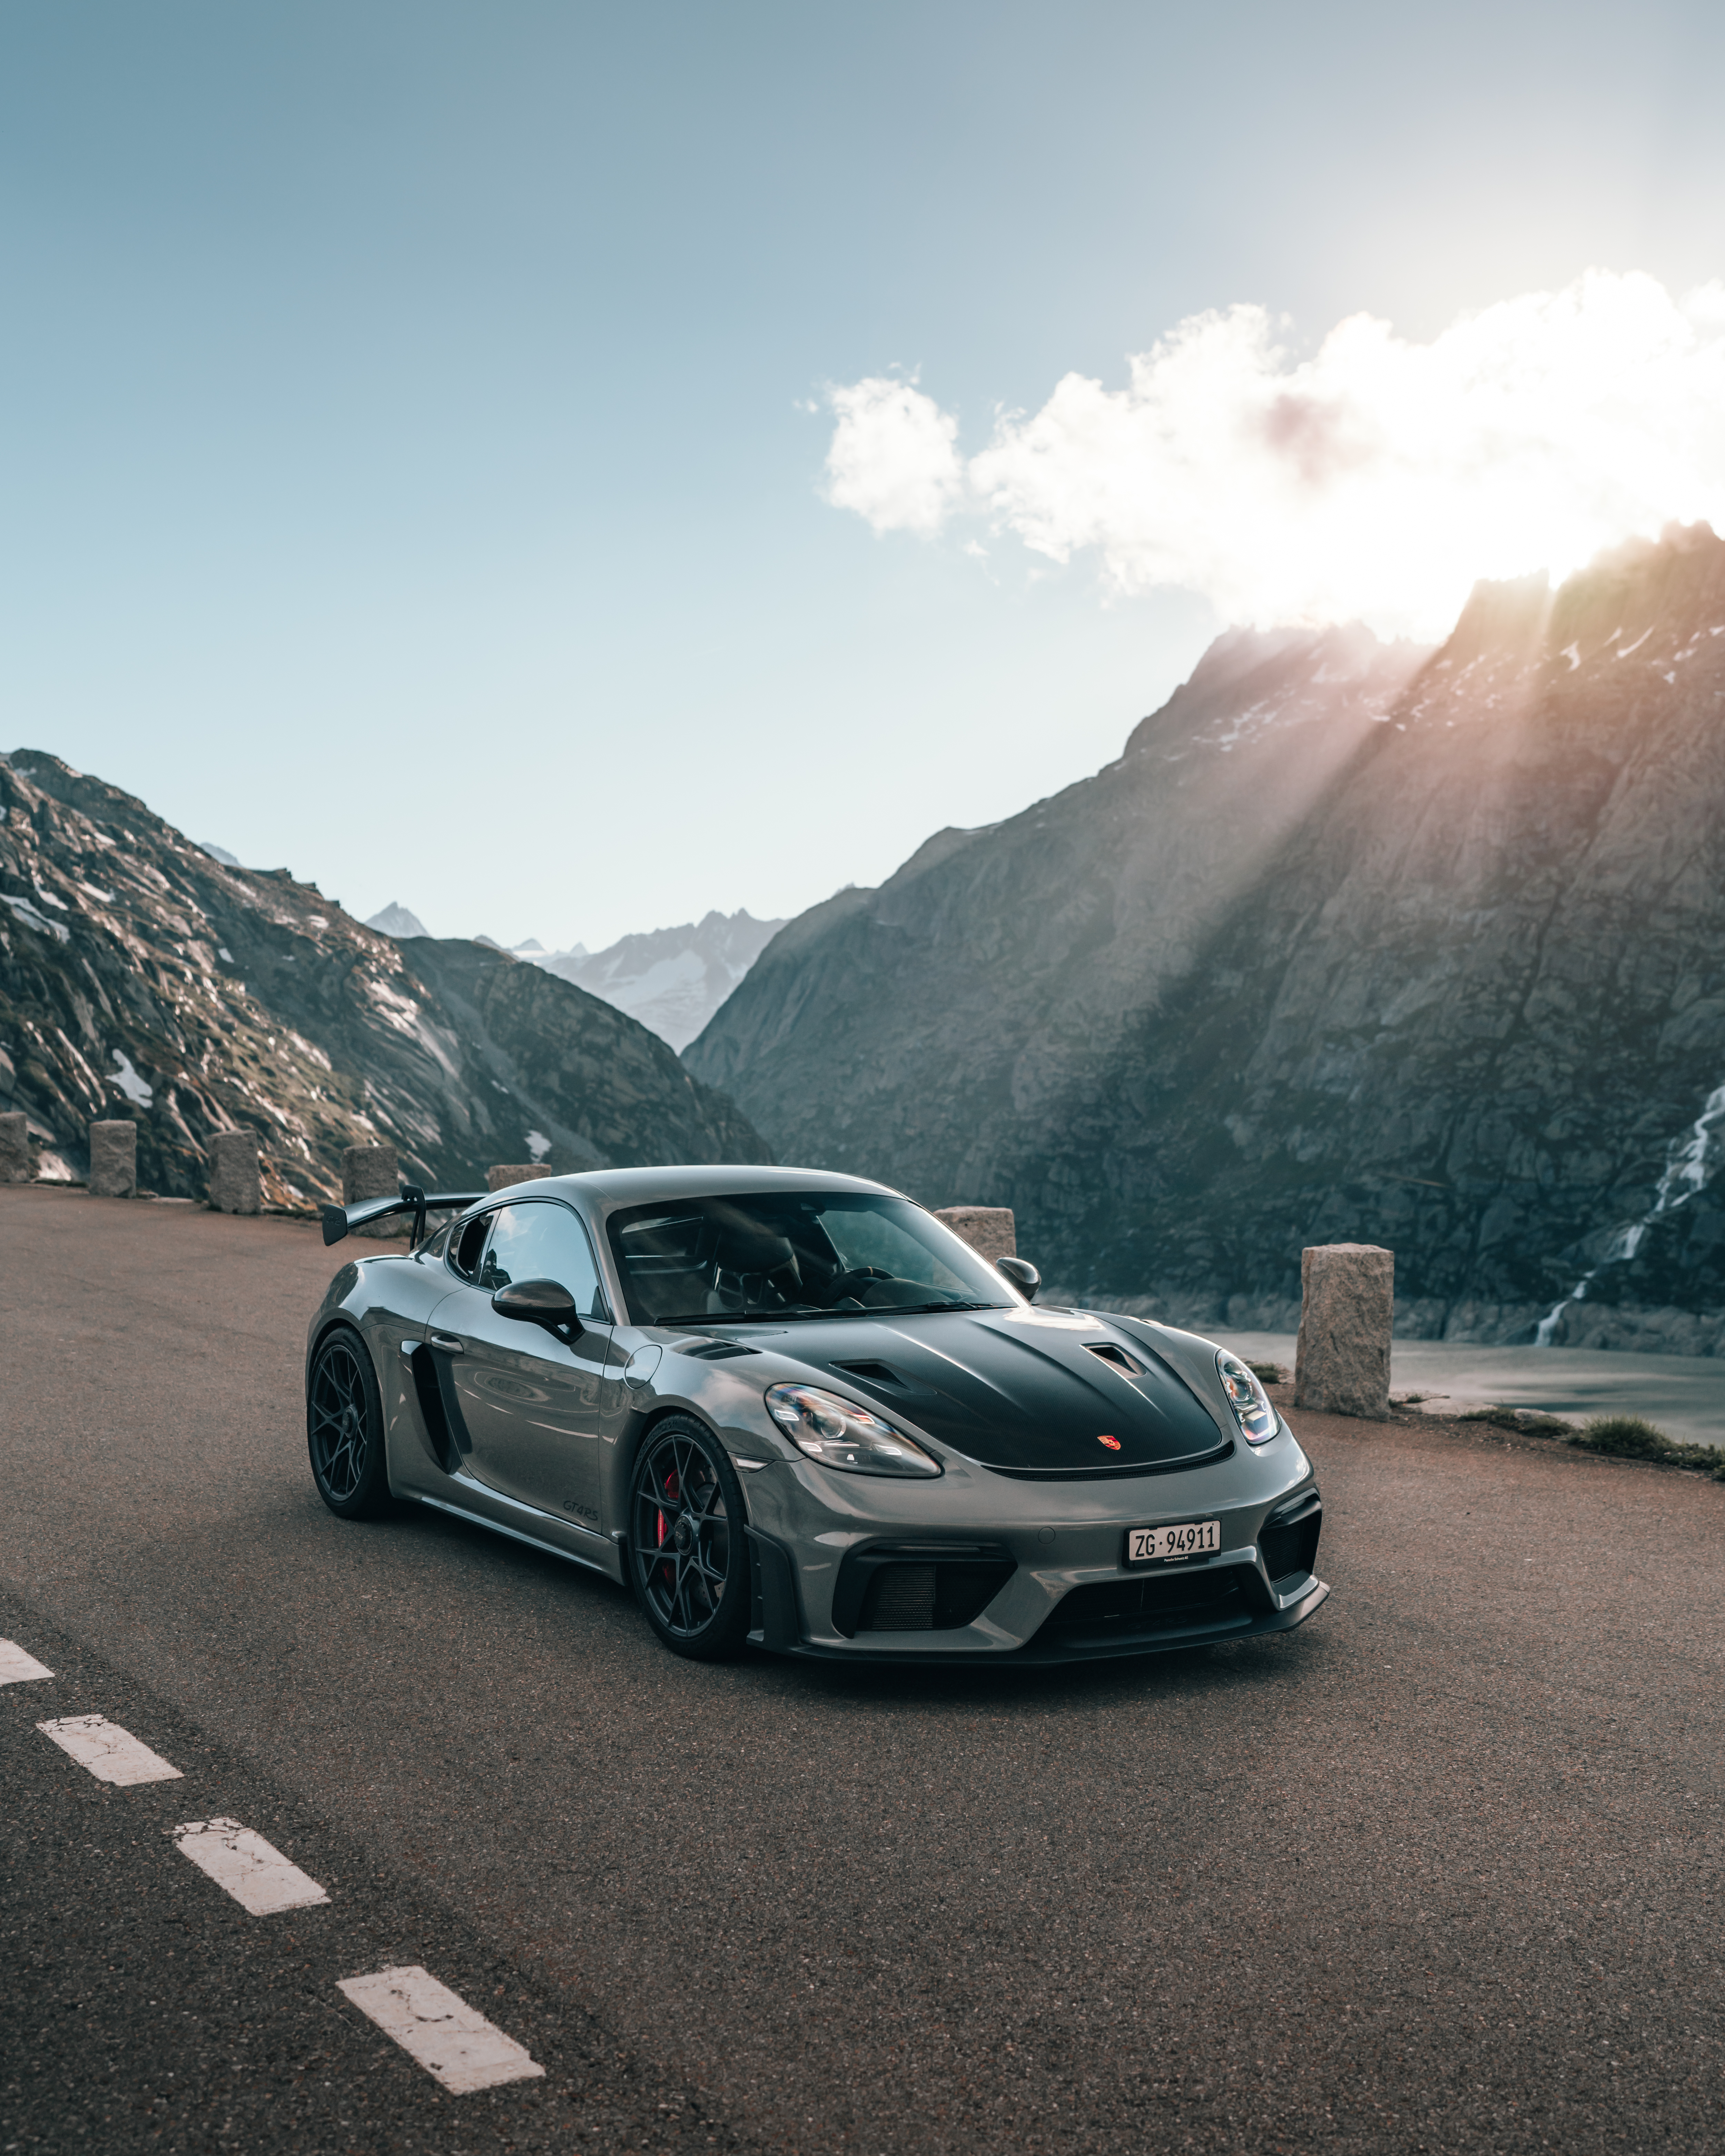 Porsche 718 Cayman GT4 RS ¬in lay-by, mountains behind it